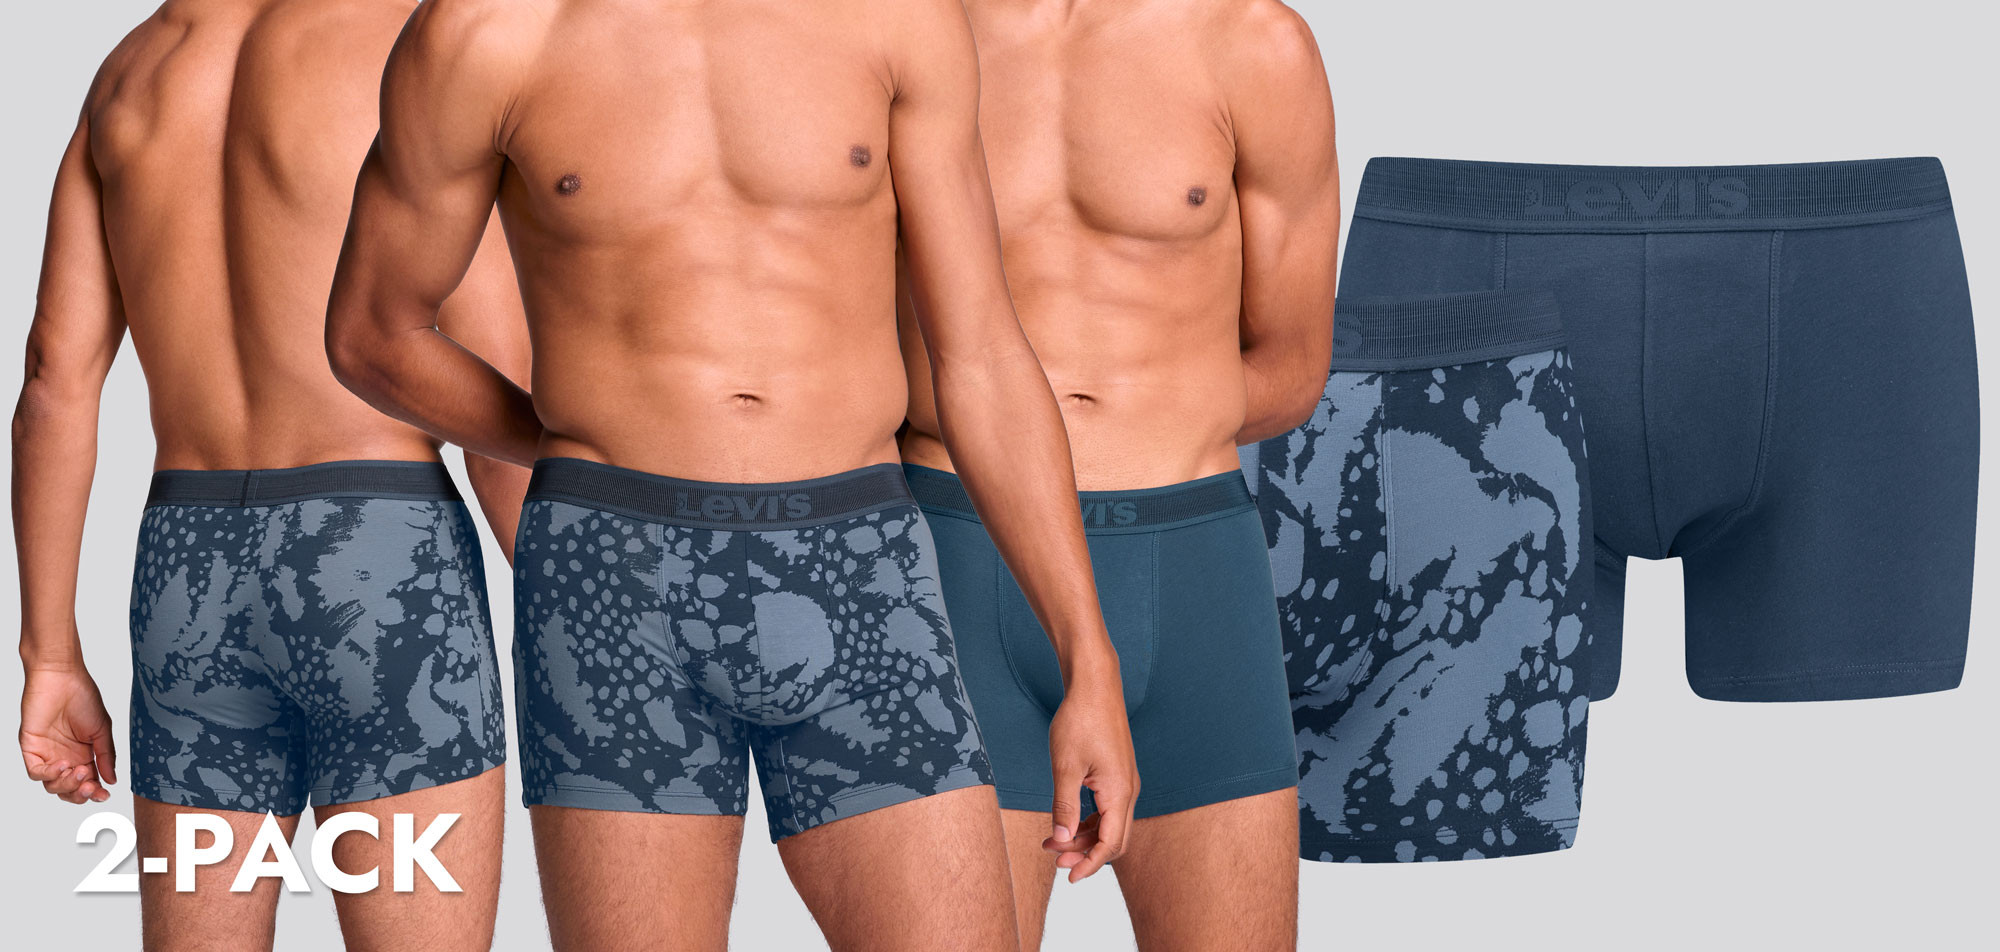 Levi_s Boxer Brief 2-Pack 904 Animal Camo, color Nee